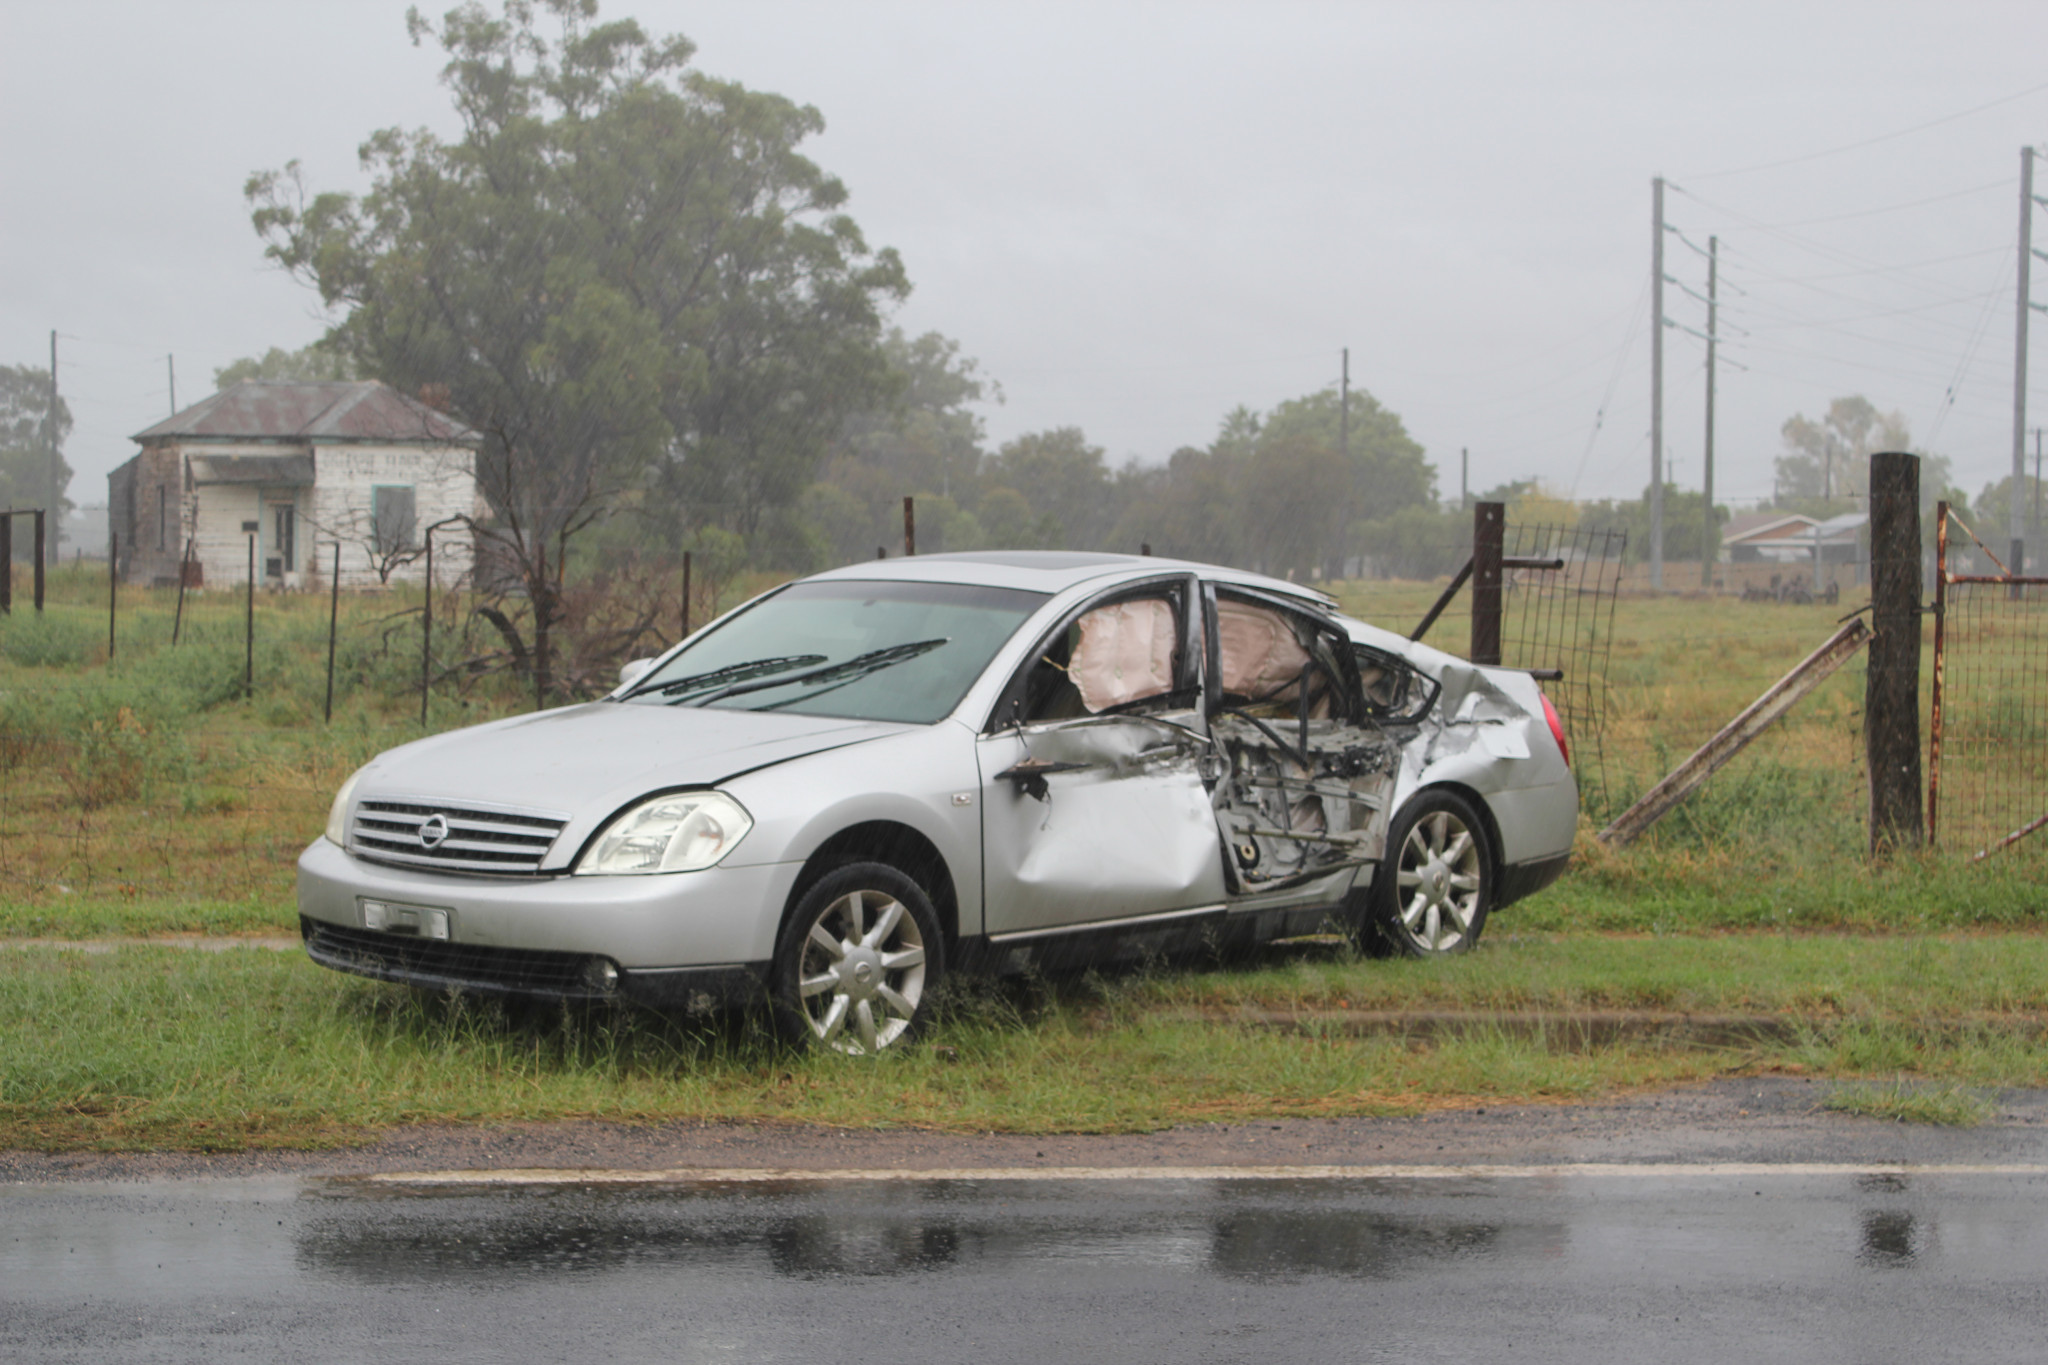 Image of the car involved in the crash Friday, April 5. Photos by: The Gilgandra Weekly.